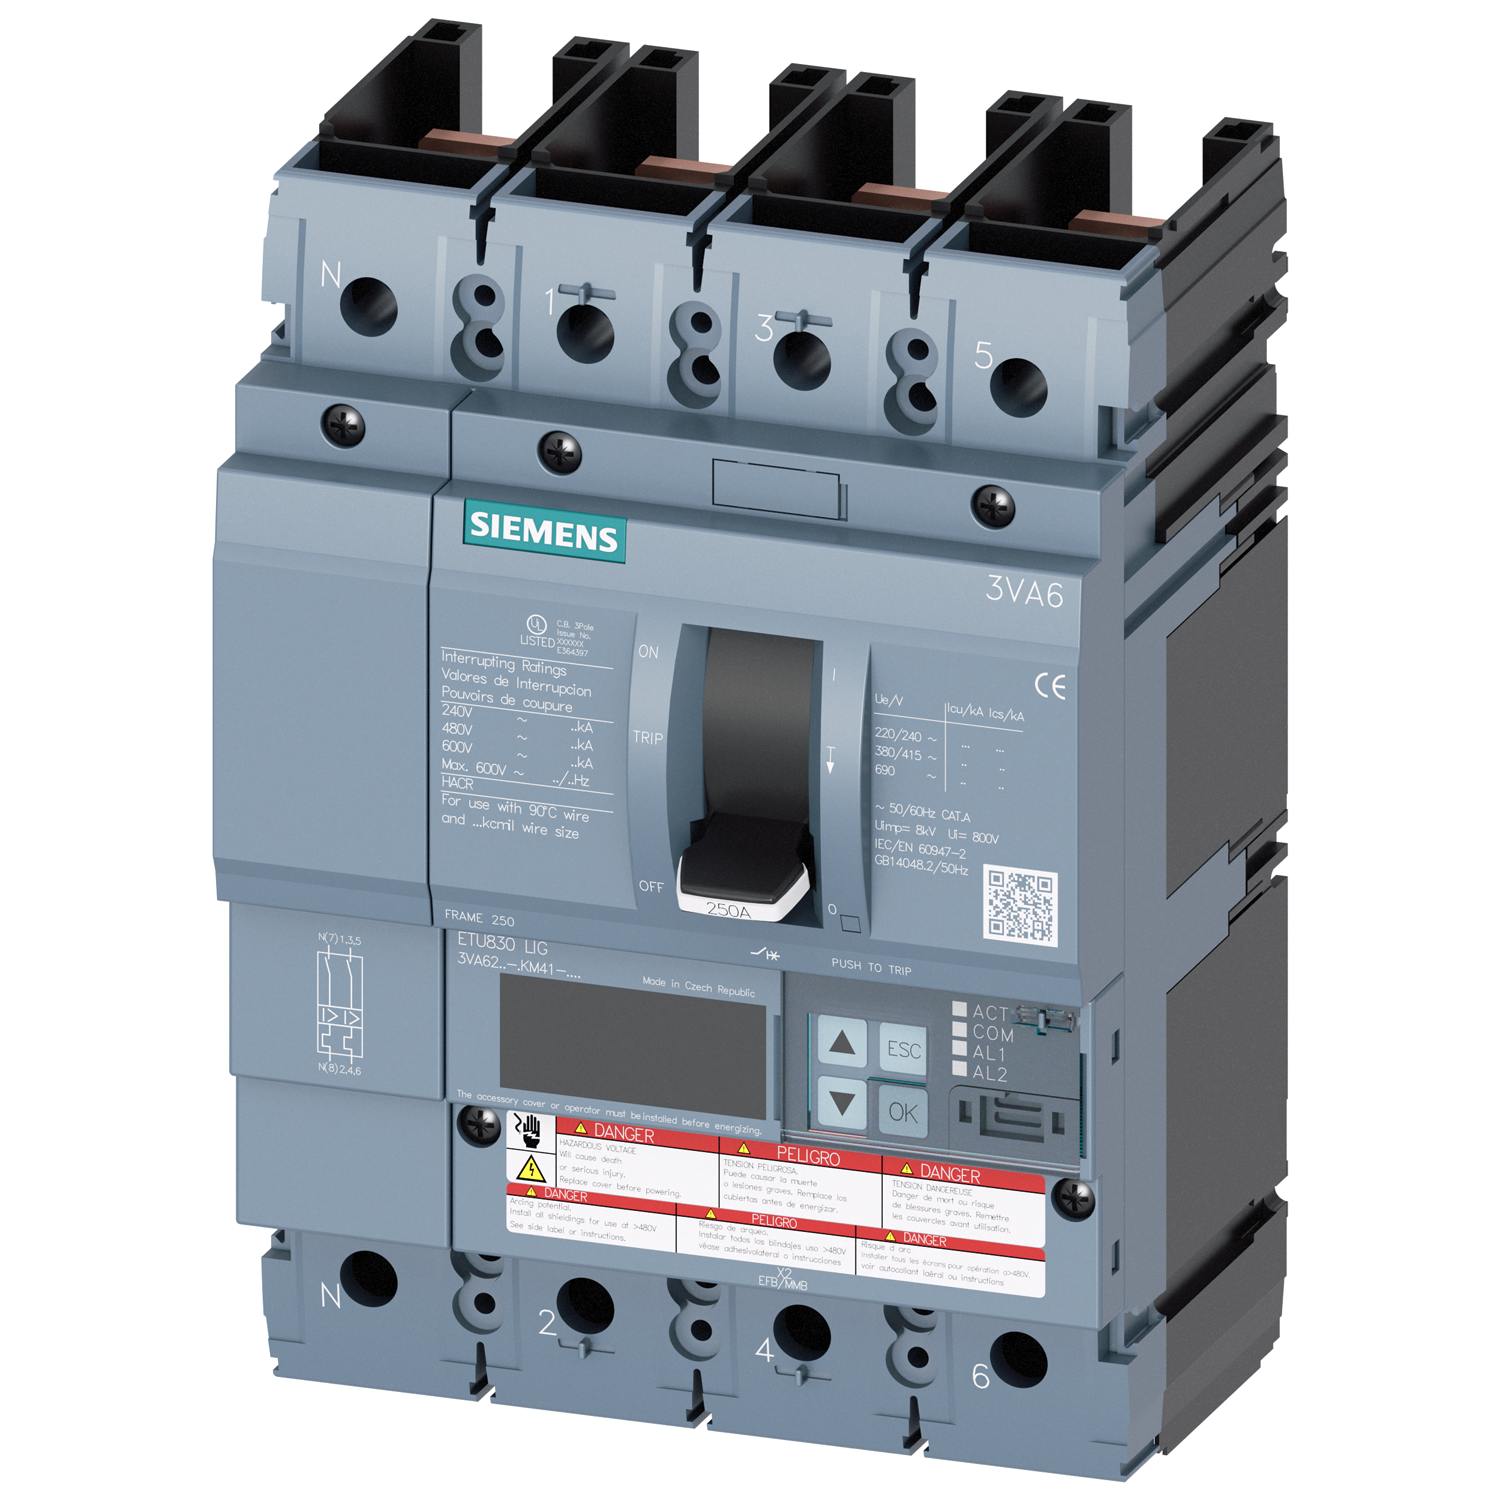 SIEMENS LOW VOLTAGE 3VA UL MOLDED CASE CIRCUIT BREAKER WITH ELECTRONIC TRIP UNIT. 3VA62 FRAME WITH MEDIUM LOW (CLASS M) BREAKING CAPACITY. 250A 4-POLE (18KAIC AT 600V) (35KAIC AT 480V). ETU830 TRIP UNIT LCD LIG WITH METERING. SPECIAL FEATURES WITHOUT LUGS. 100 PERCENT RATED. DIMENSIONS (W x H x D) IN 5.5 x 7.8 x 4.2.